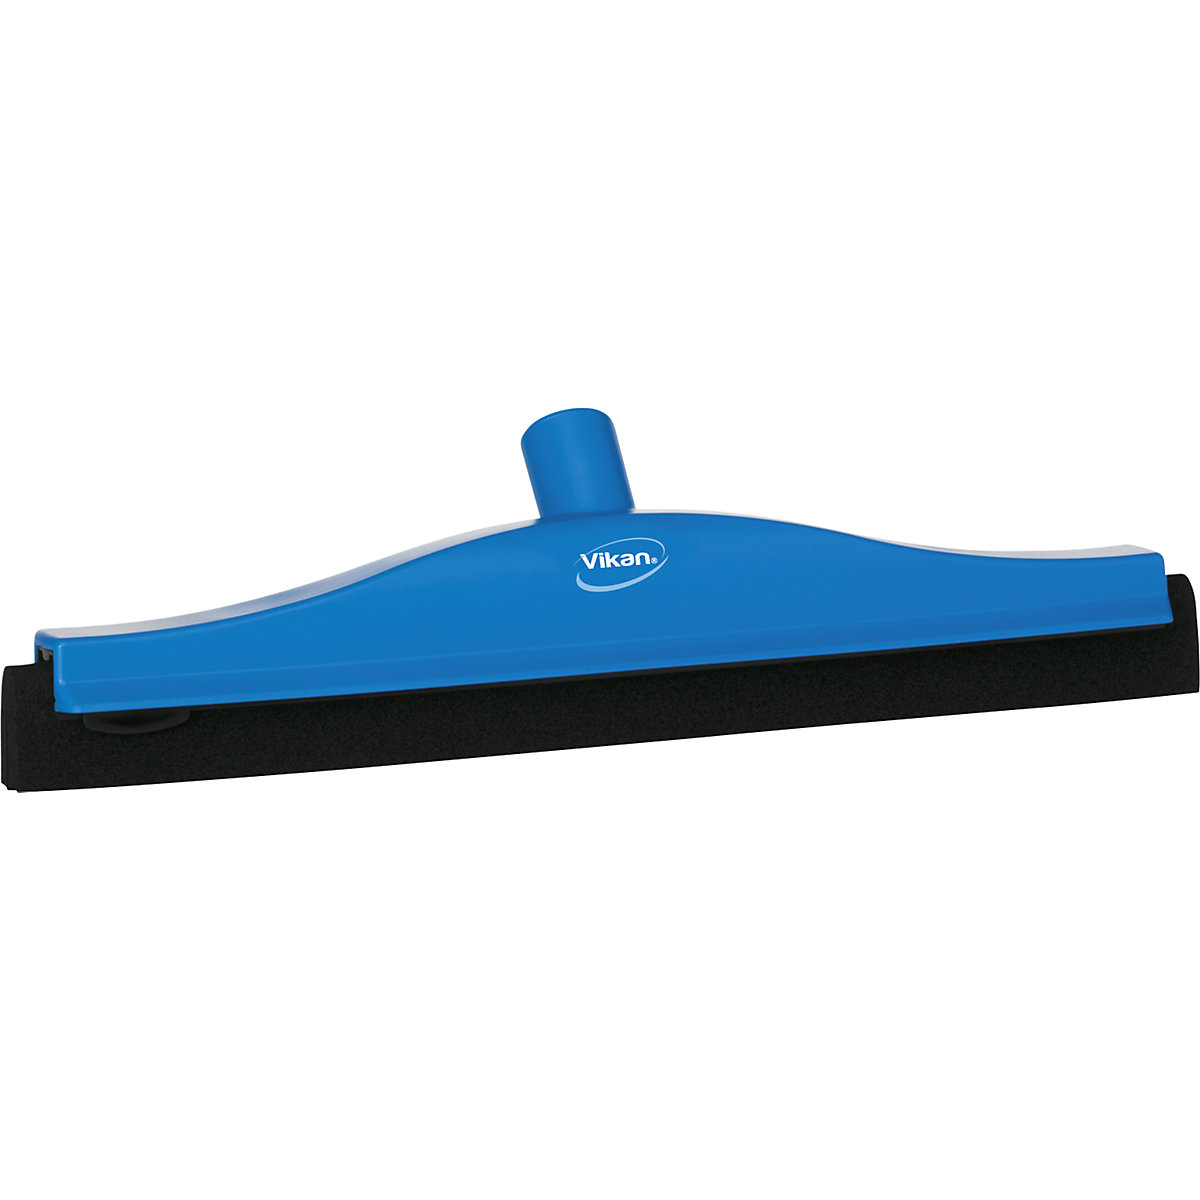 Water wiper with replaceable cartridge - Vikan